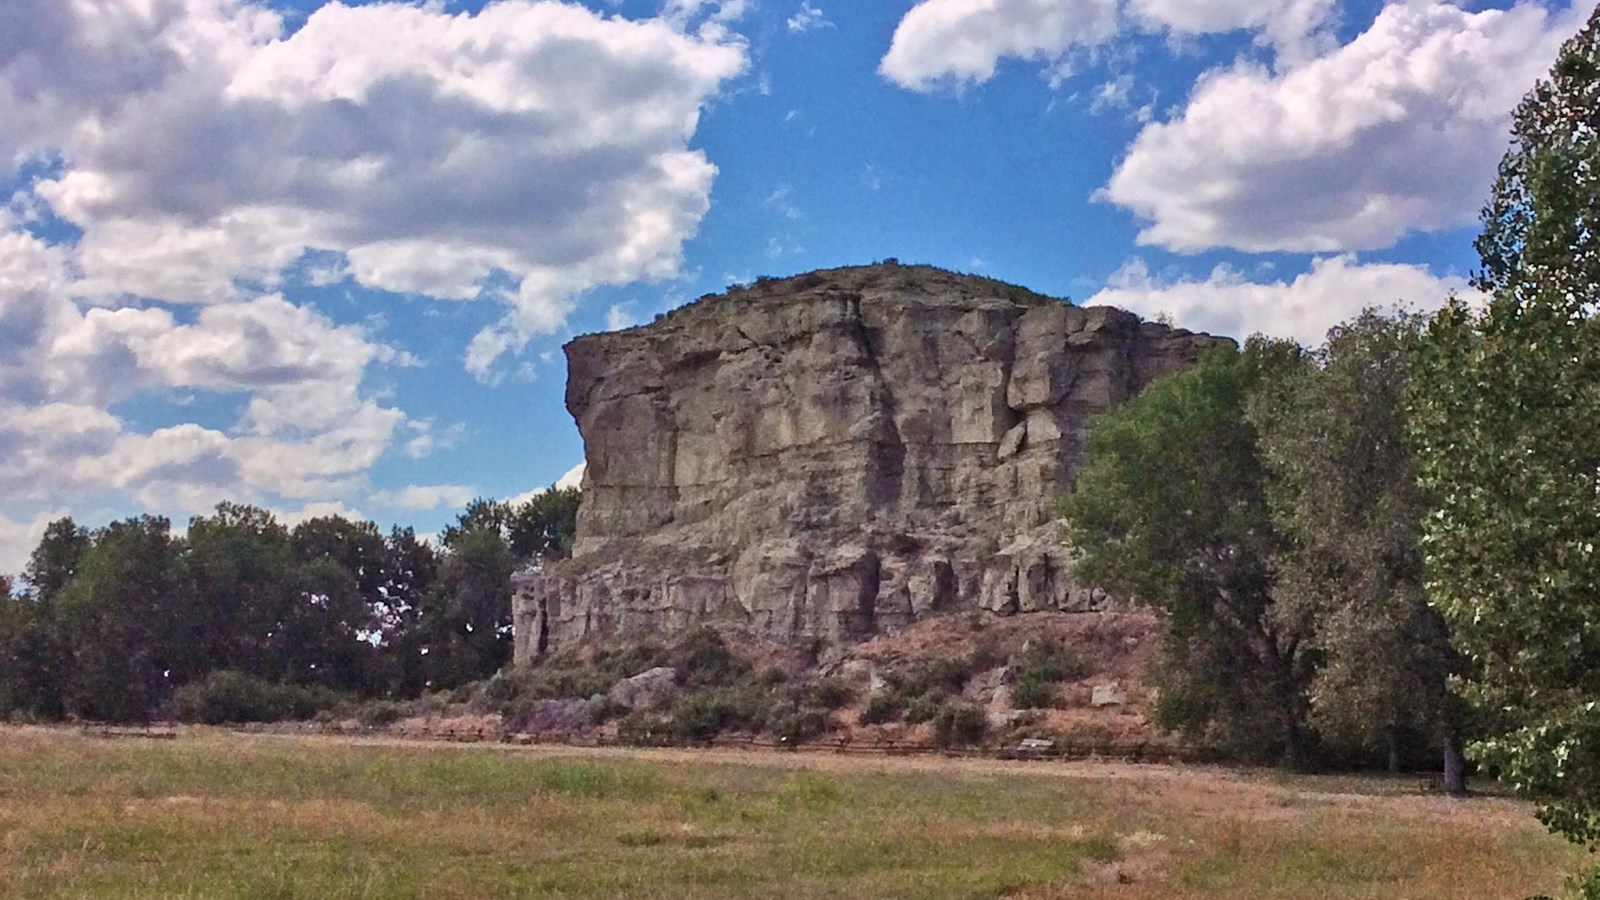 Large rock cliff rising from flat grassy surface